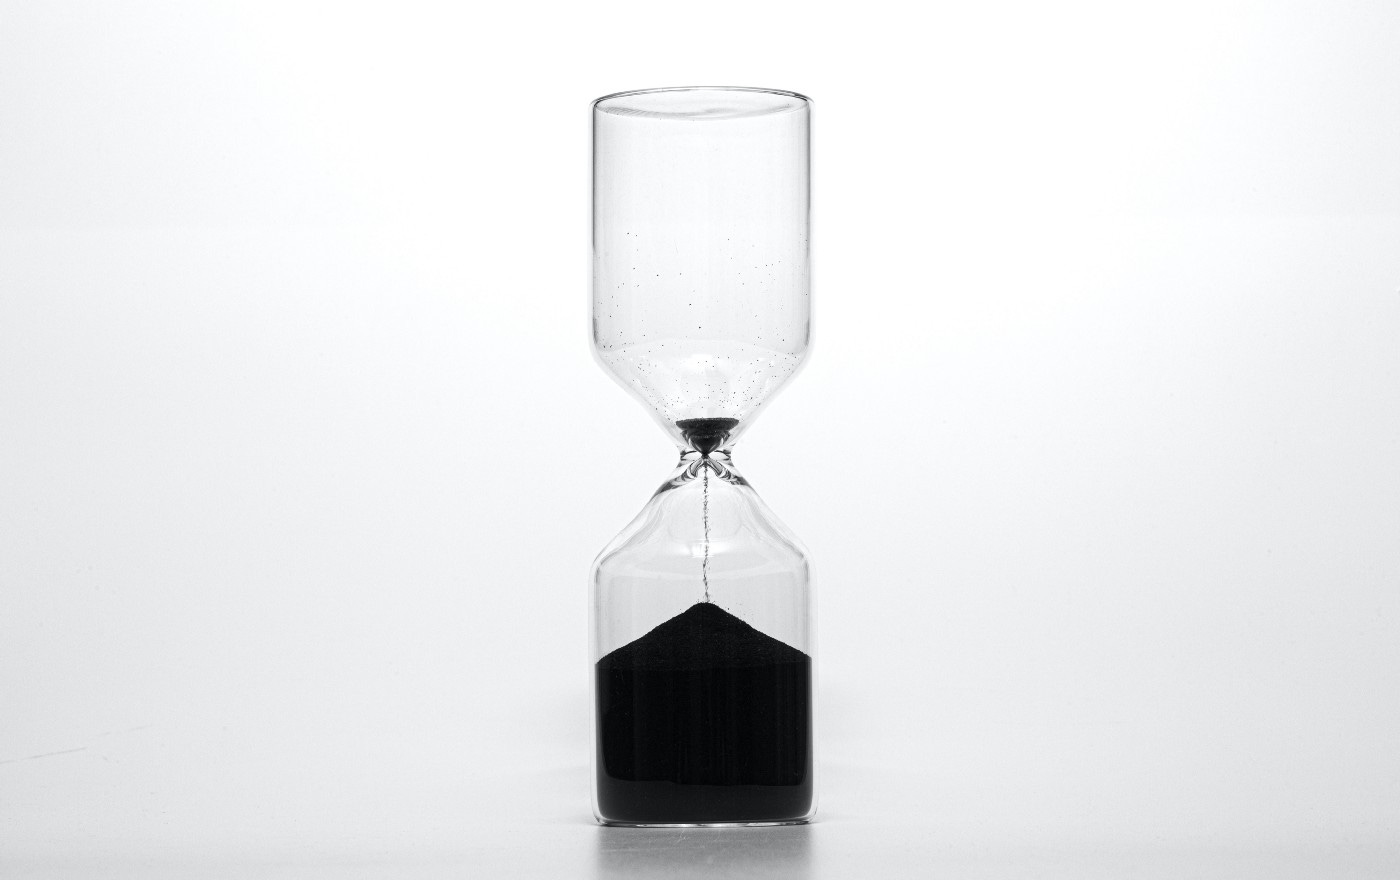 A hourglass is shown with most of the sand on the bottom. Only a little bit of sand is at the top with it flowing into the bottom.